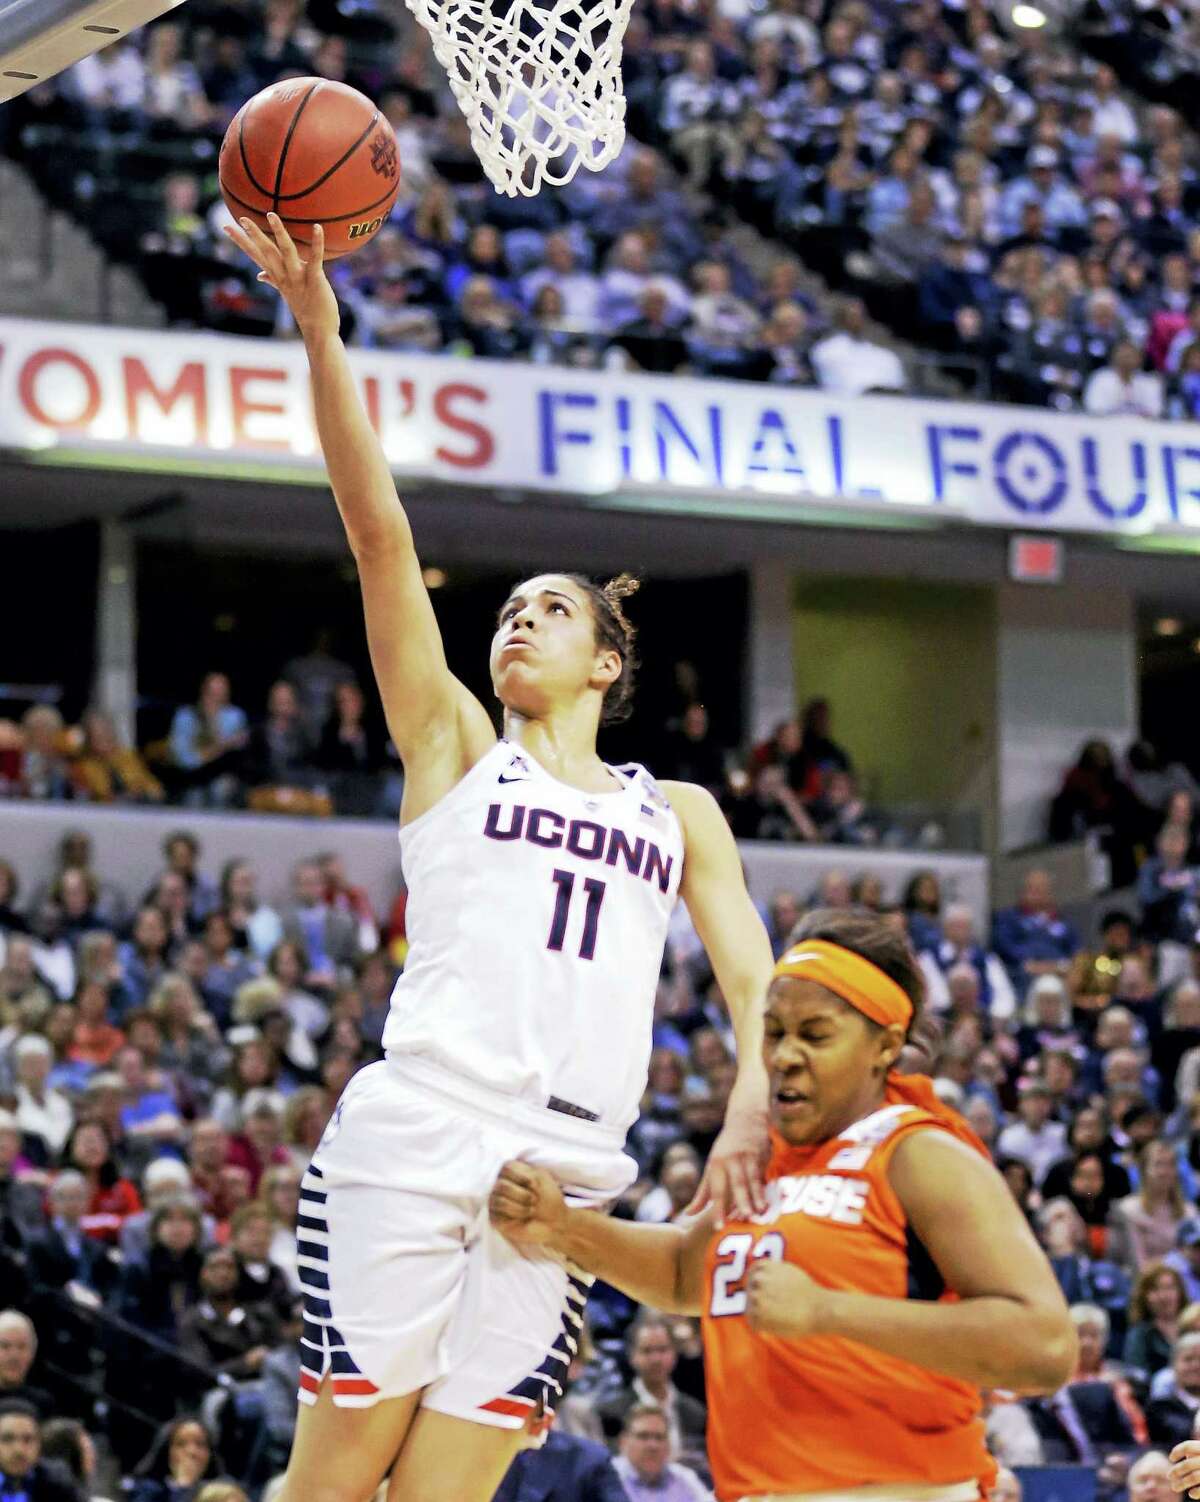 UConn’s Kia Nurse is recovering from sports hernia surgery according to a report.